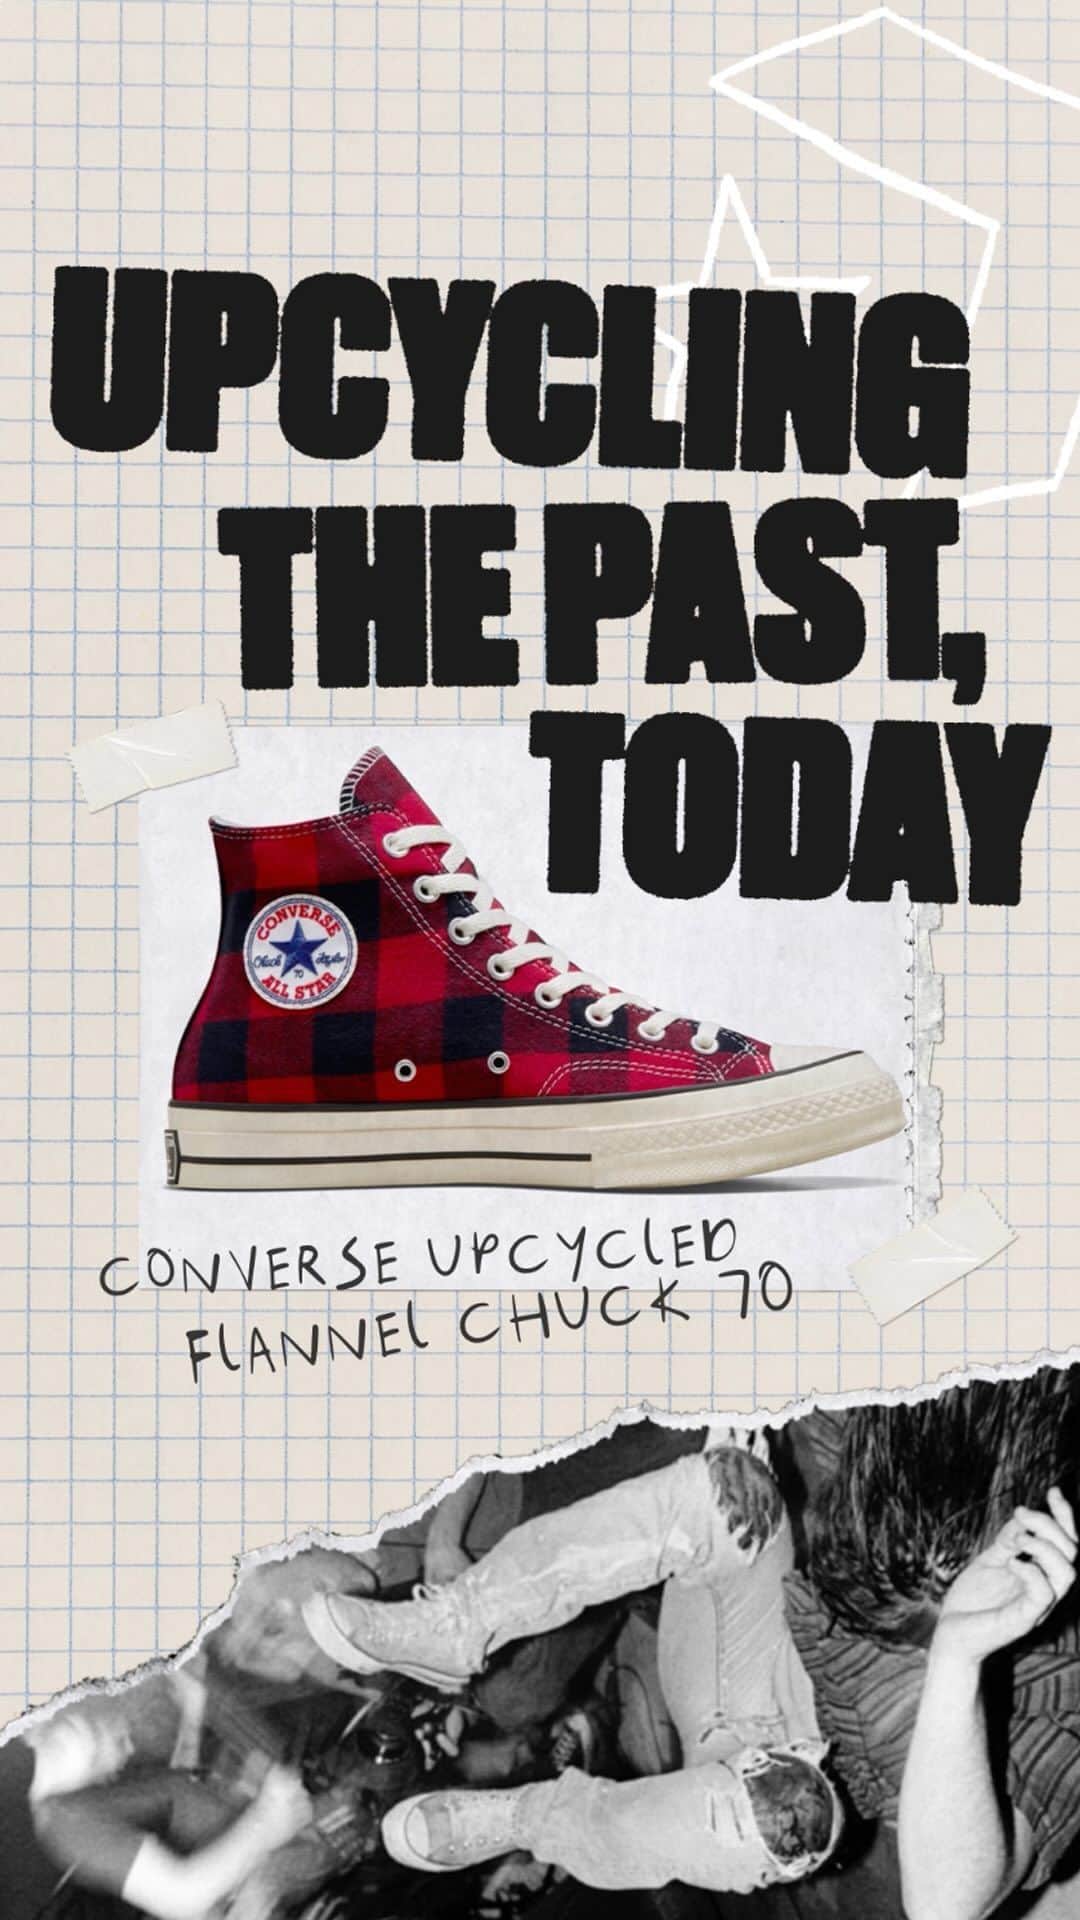 converseのインスタグラム：「A piece of the past, made new for you 🔄 We took inspiration from some of our earliest pattern designs to create an all new Chuck 70, made with upcycled flannels sourced by @beyondretro 🤝 #CreateNext  Shop the one-of-a-kind Converse Upcycled Flannel Chuck 70 for a limited time only on Converse.com tomorrow ✌️」